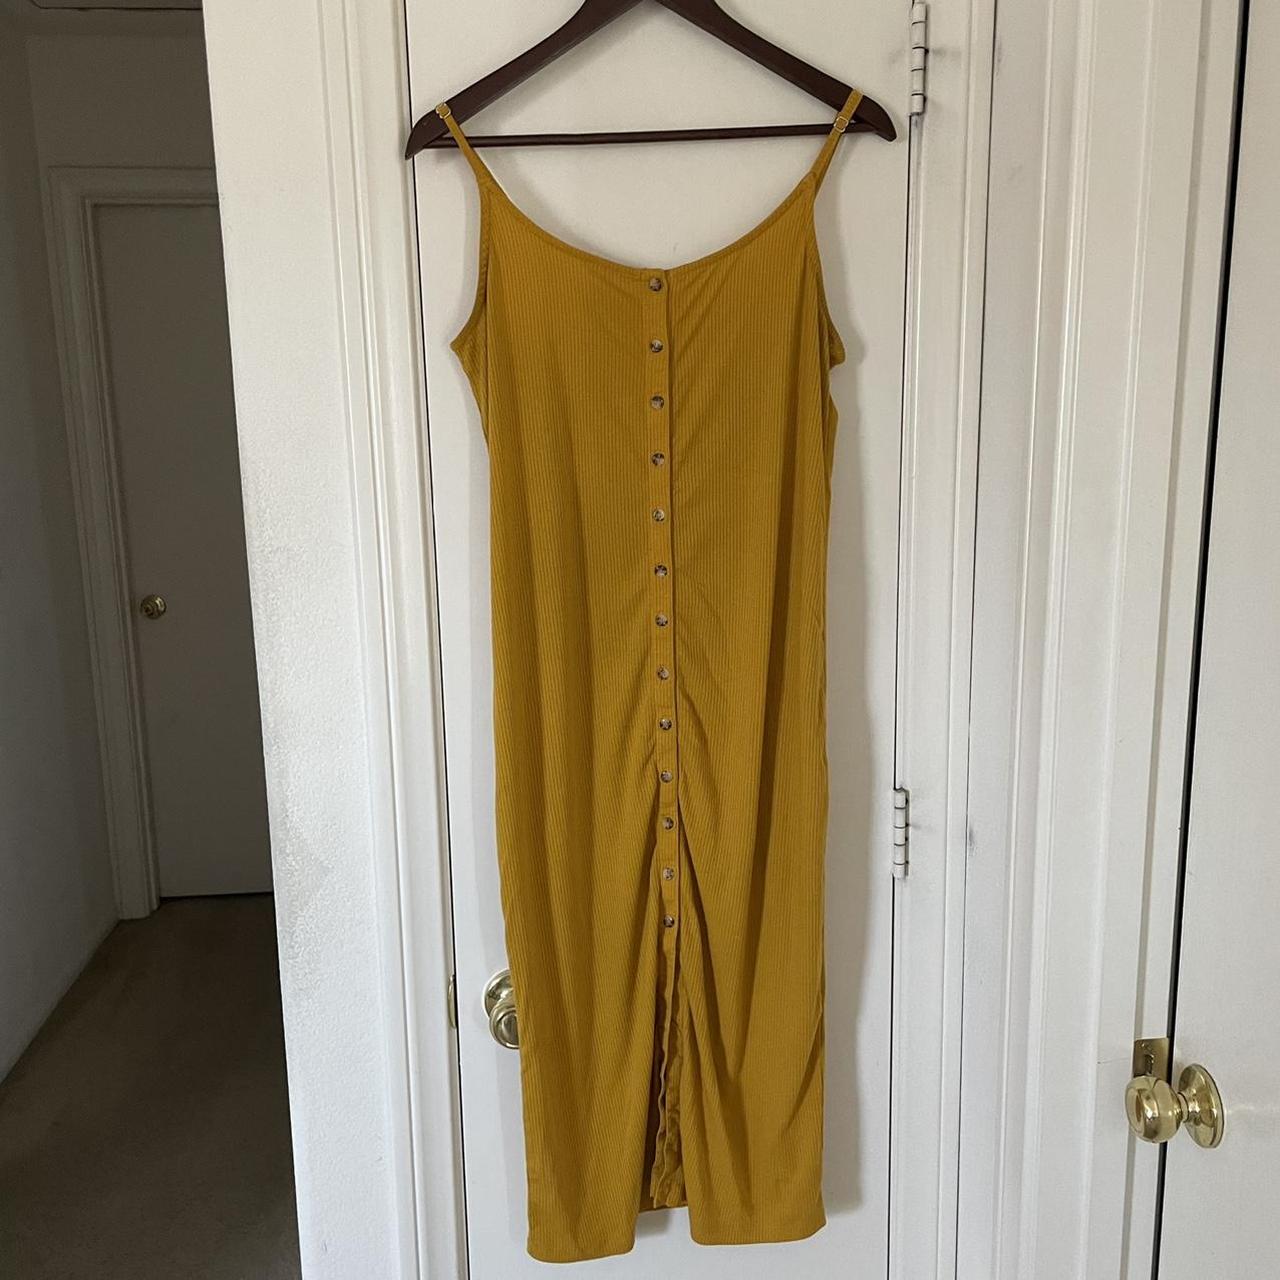 Poof Women's Yellow and Gold Dress